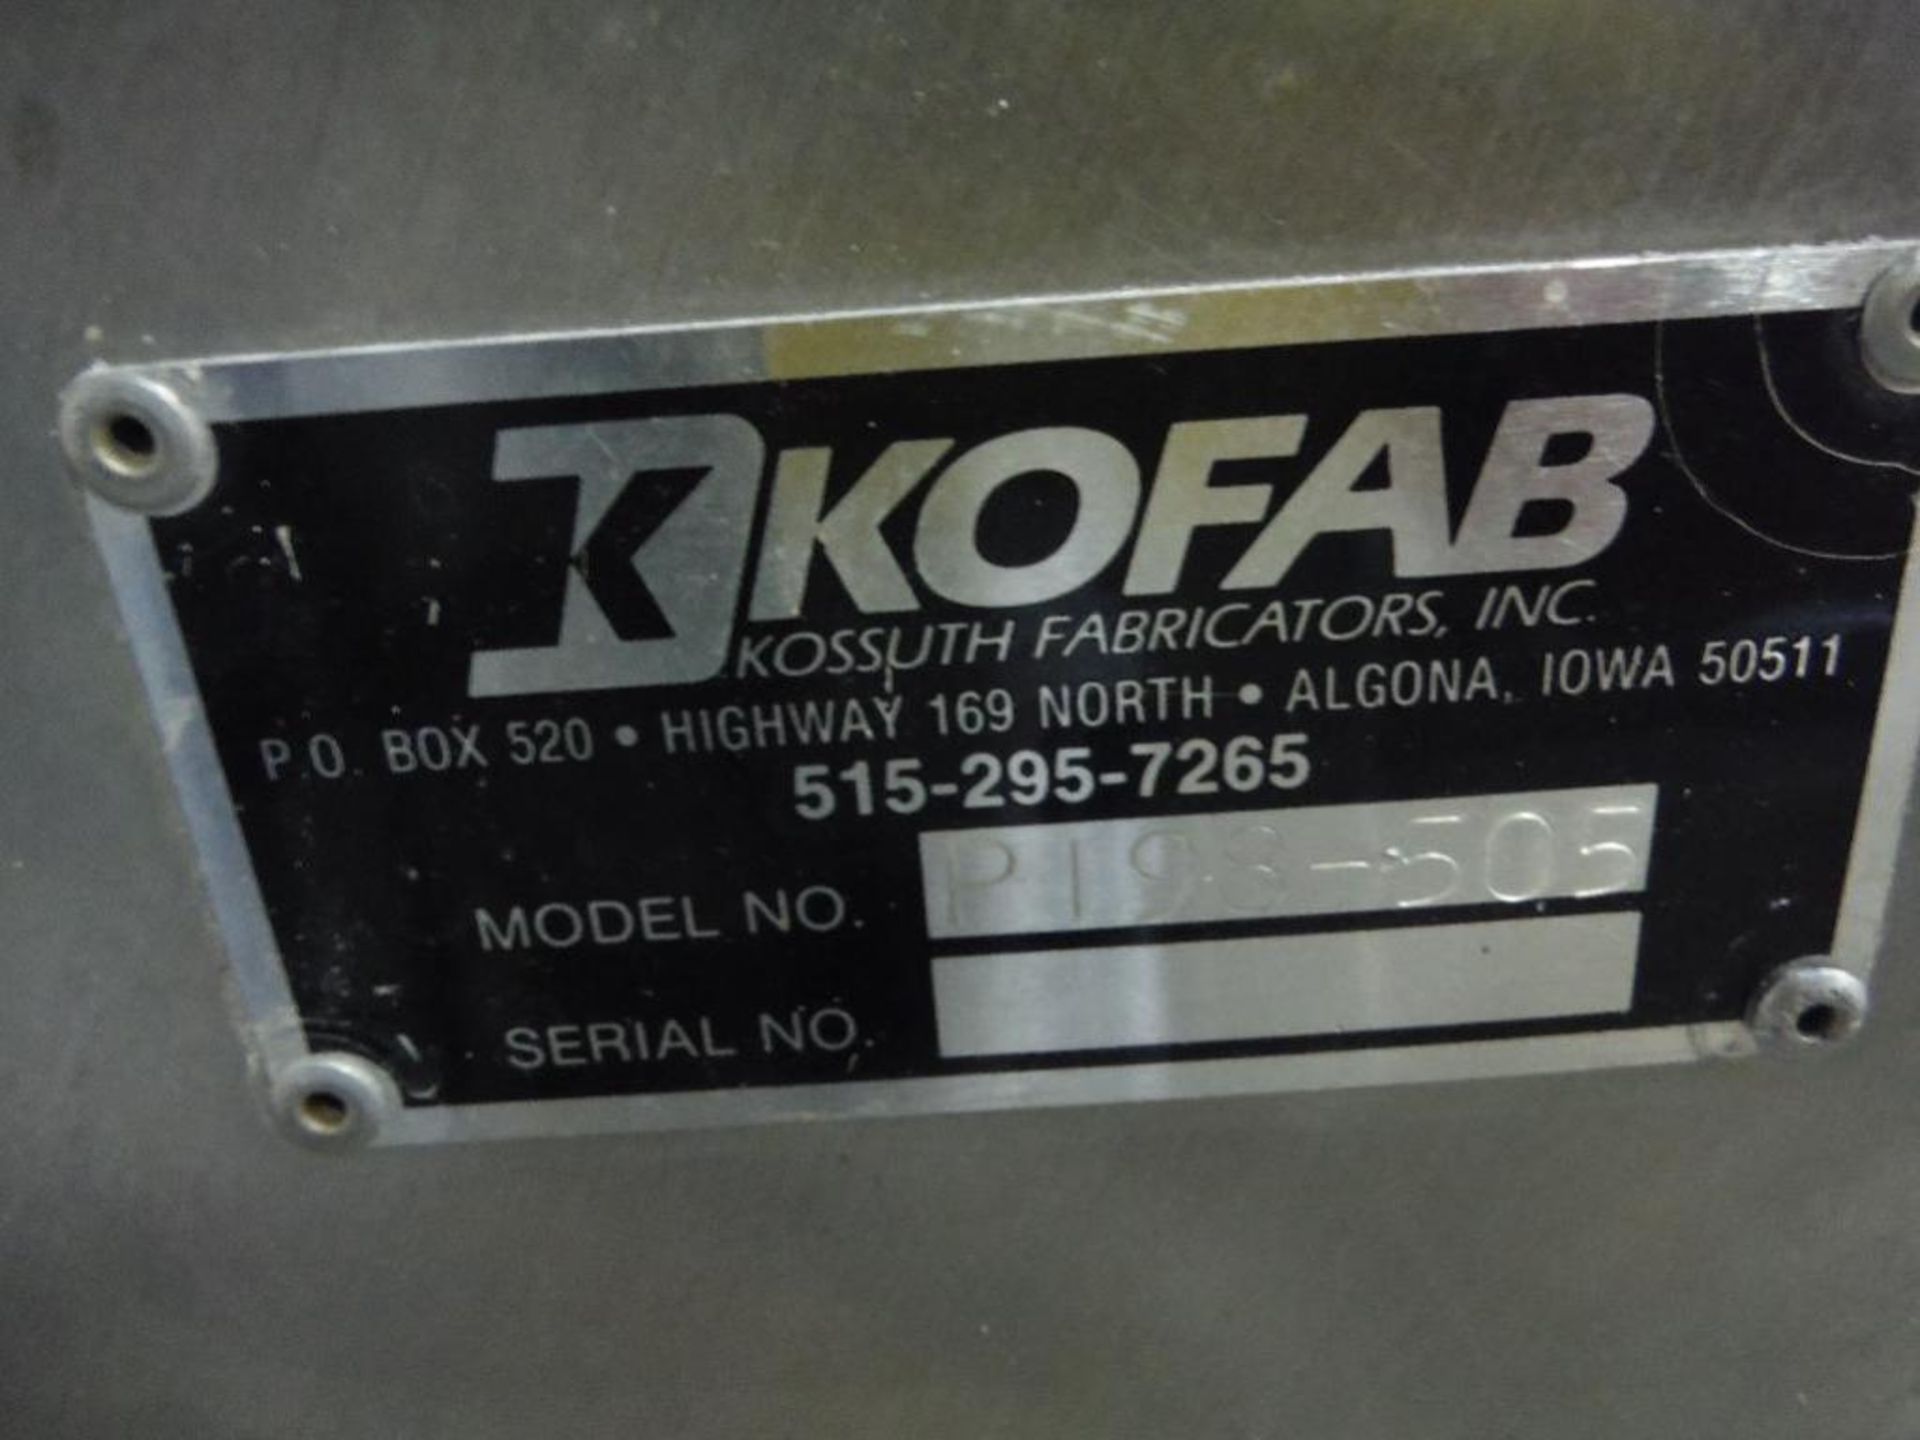 Kofab SS conveyor, flighted belt, 88 in. long x 36 in. wide x 40 in. tall, 1 in. cleats, motor and d - Image 6 of 6